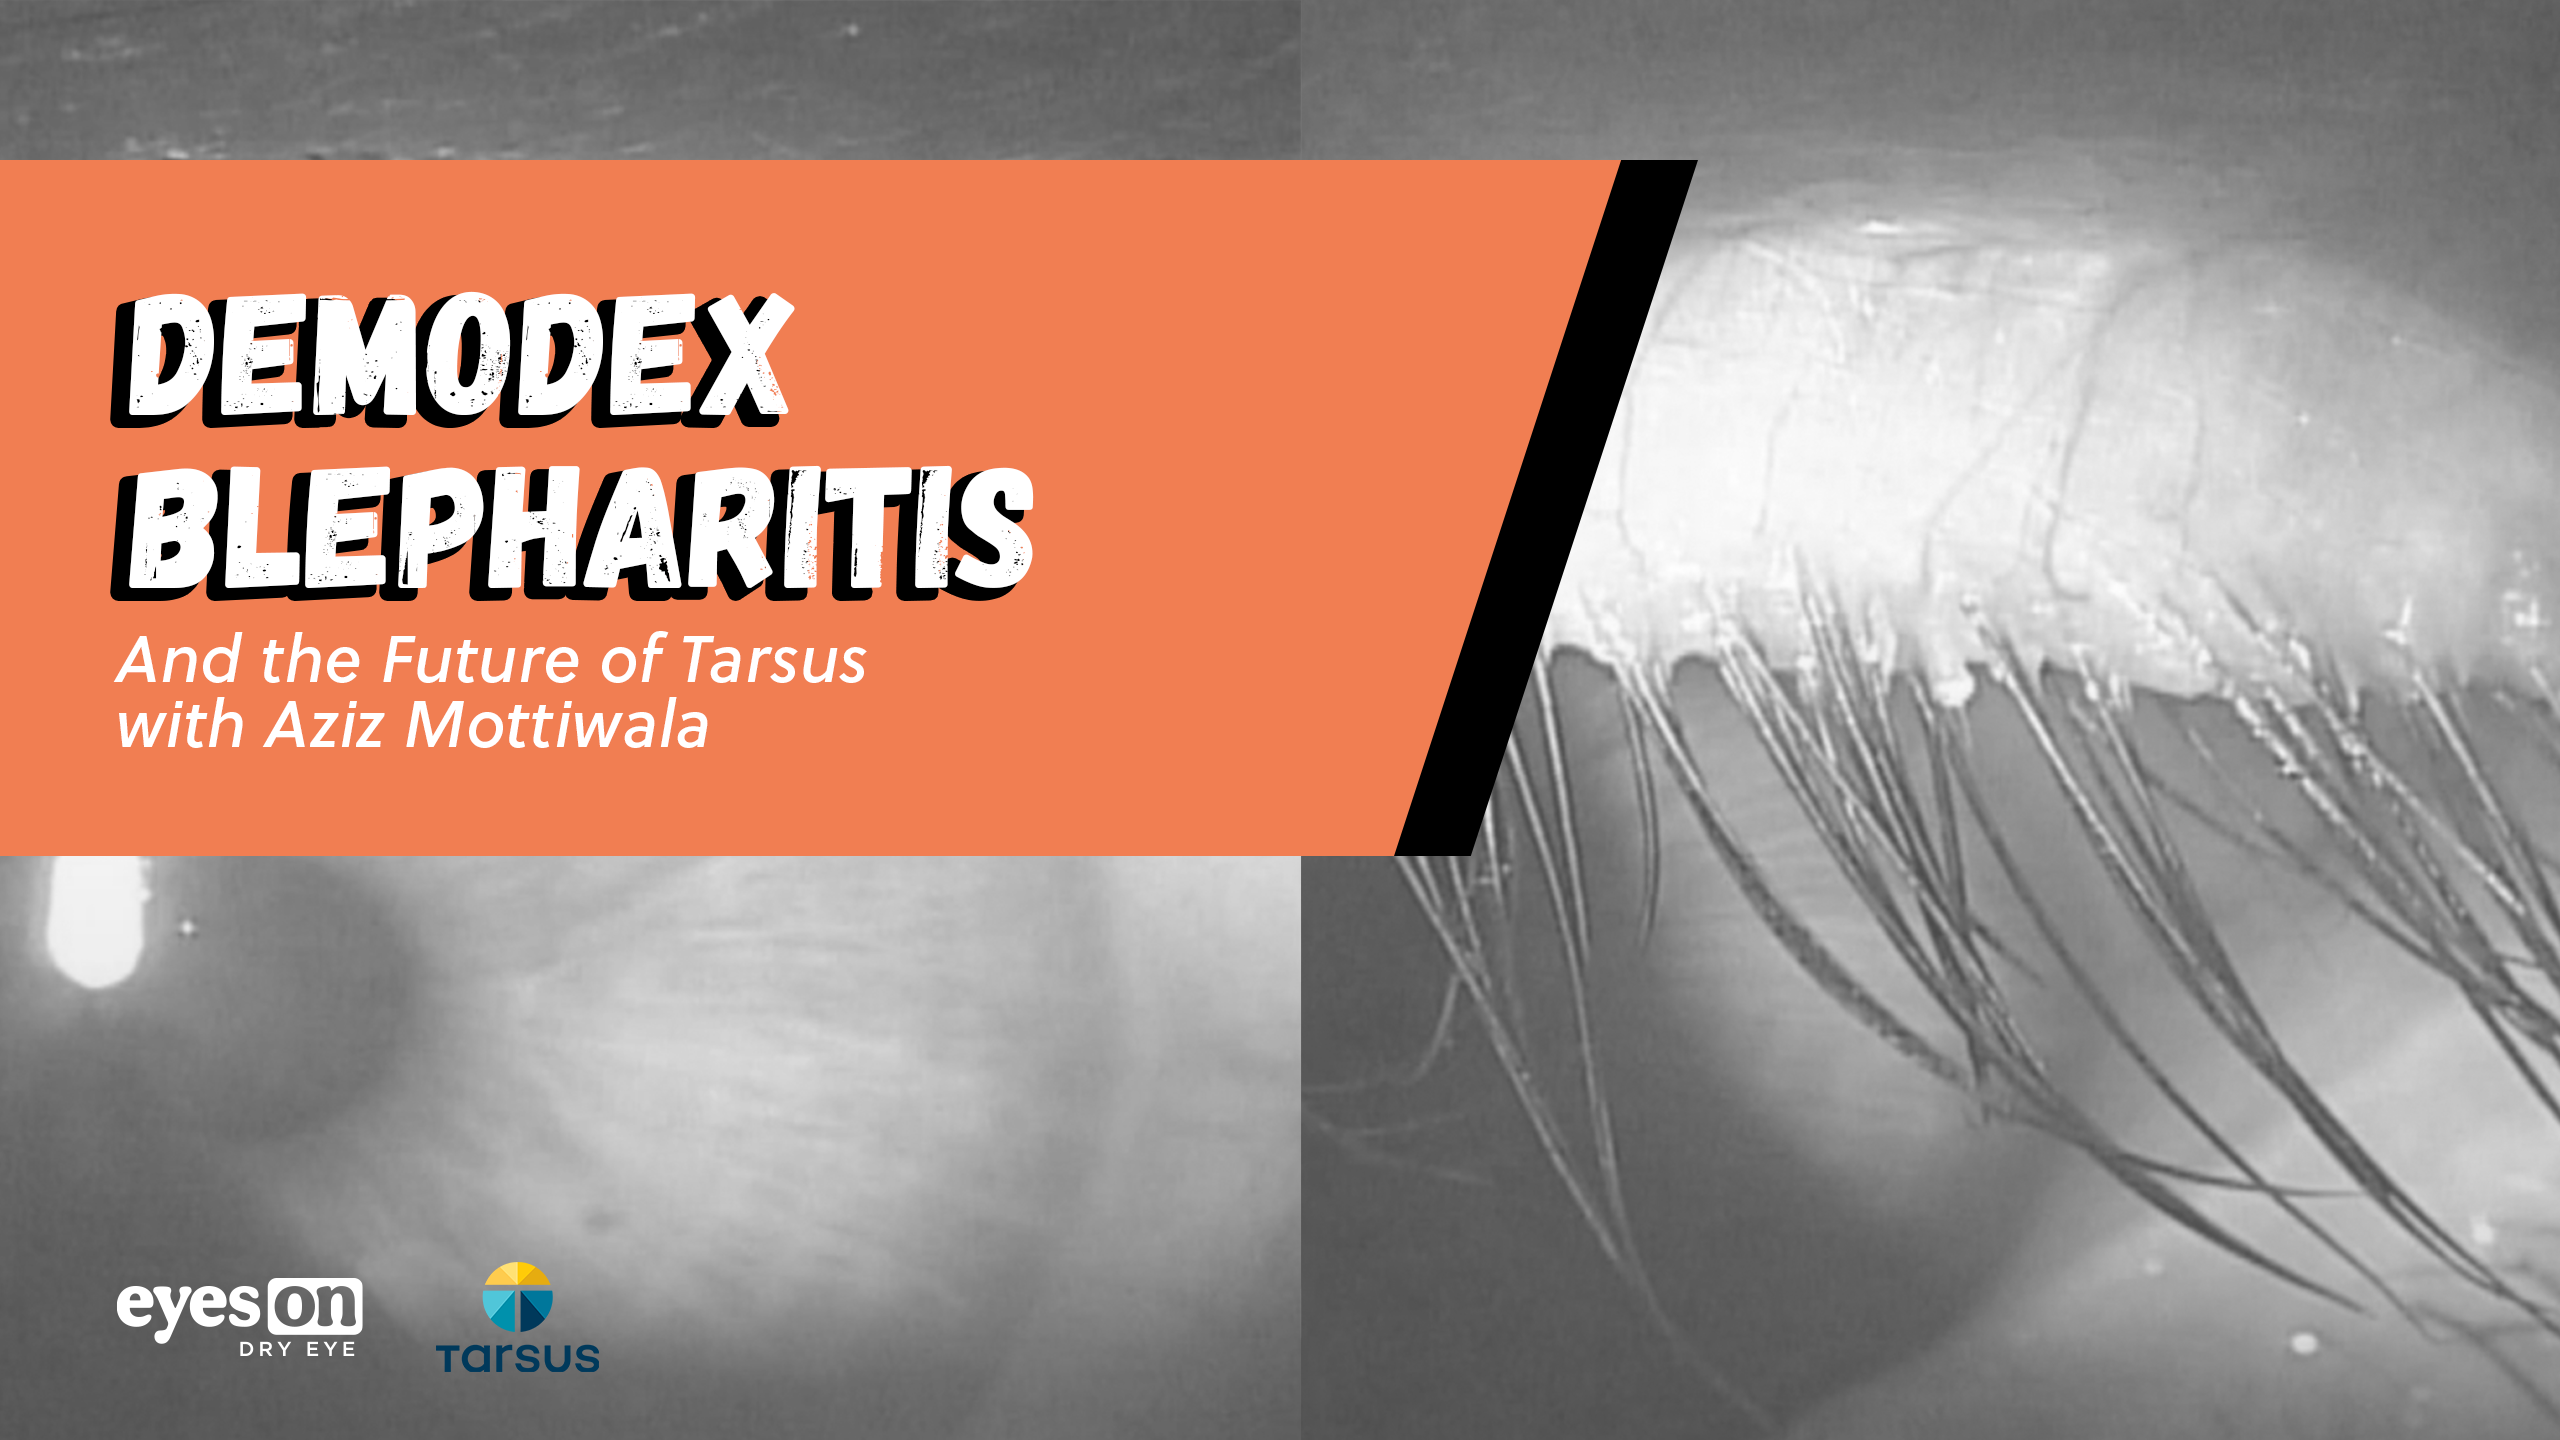 Slit Lamp Exams and Collarettes: The High Prevalence of Demodex Blepharitis and What Tarsus is Aiming to Do About It